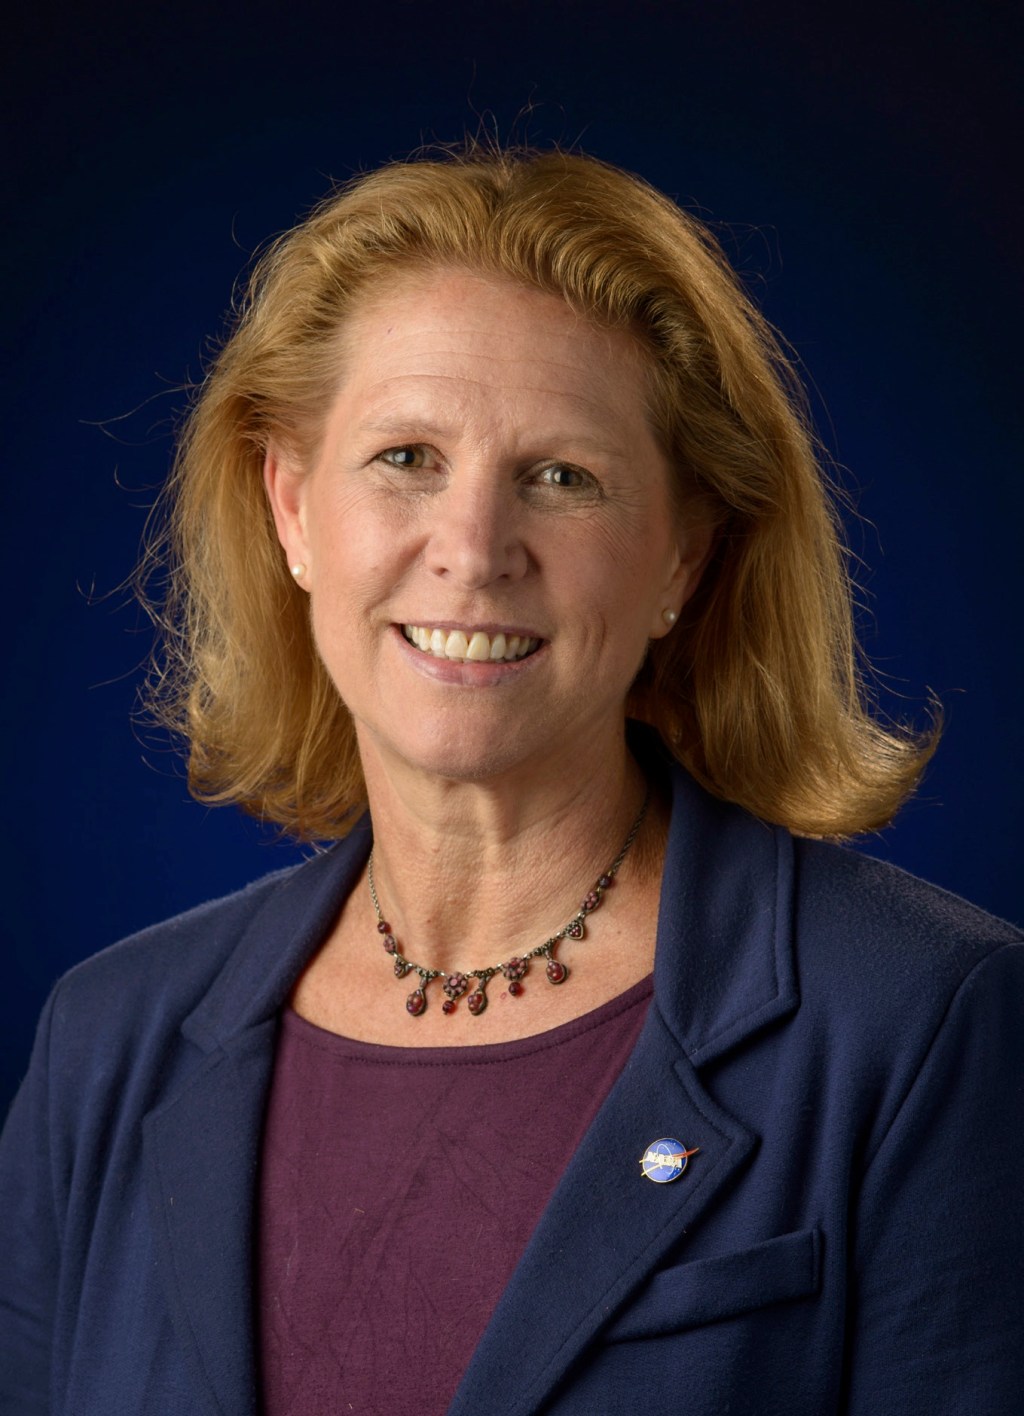 Dr. Lori Glaze is the Acting Deputy Associate Administrator for NASA’s Exploration Systems Development Mission Directorate (ESDMD).